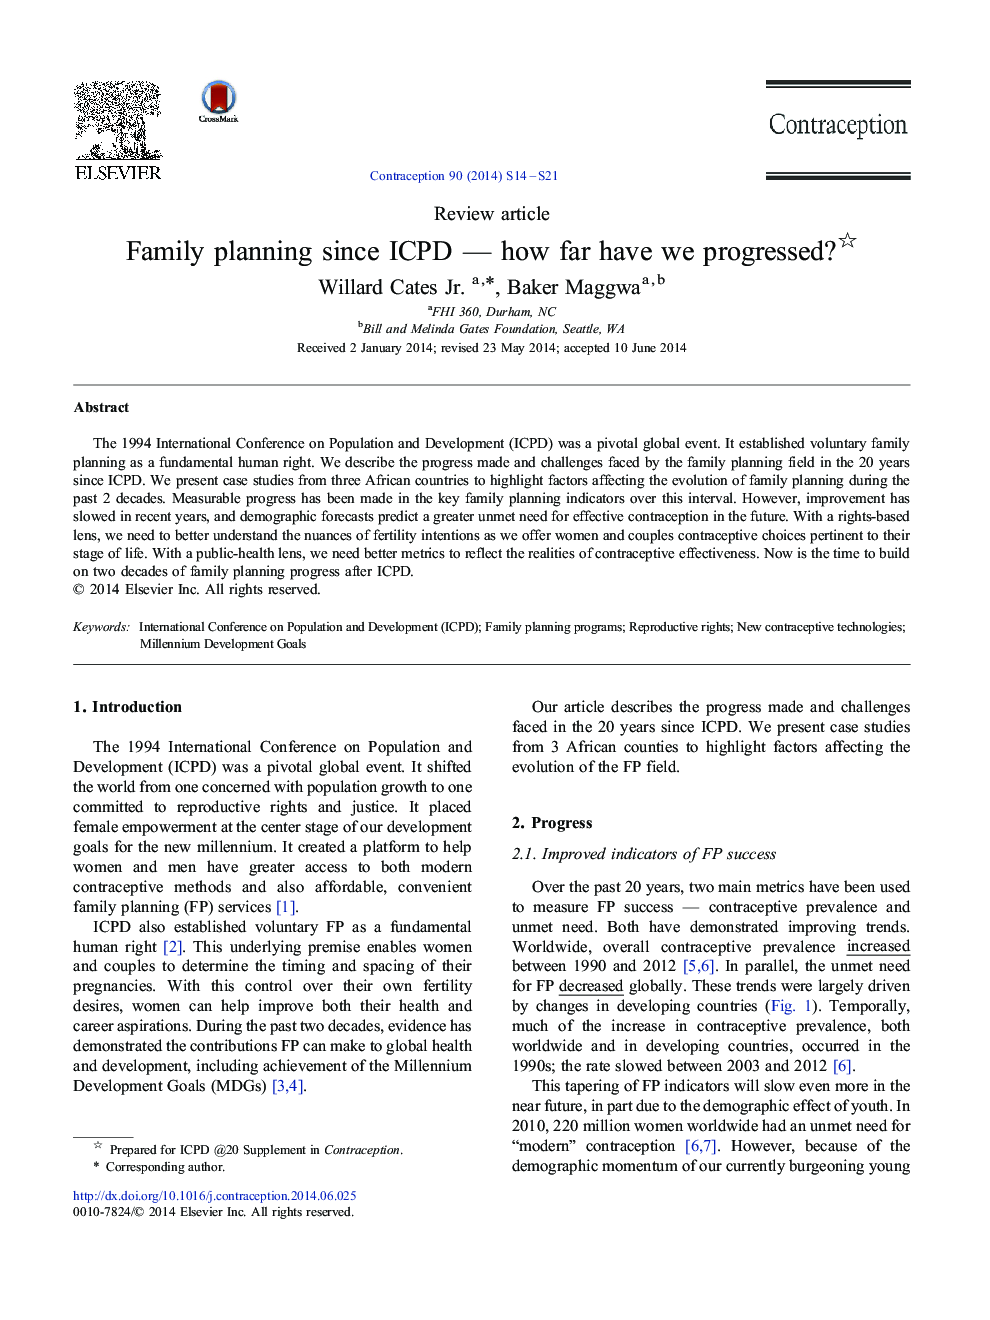 Family planning since ICPD - how far have we progressed?